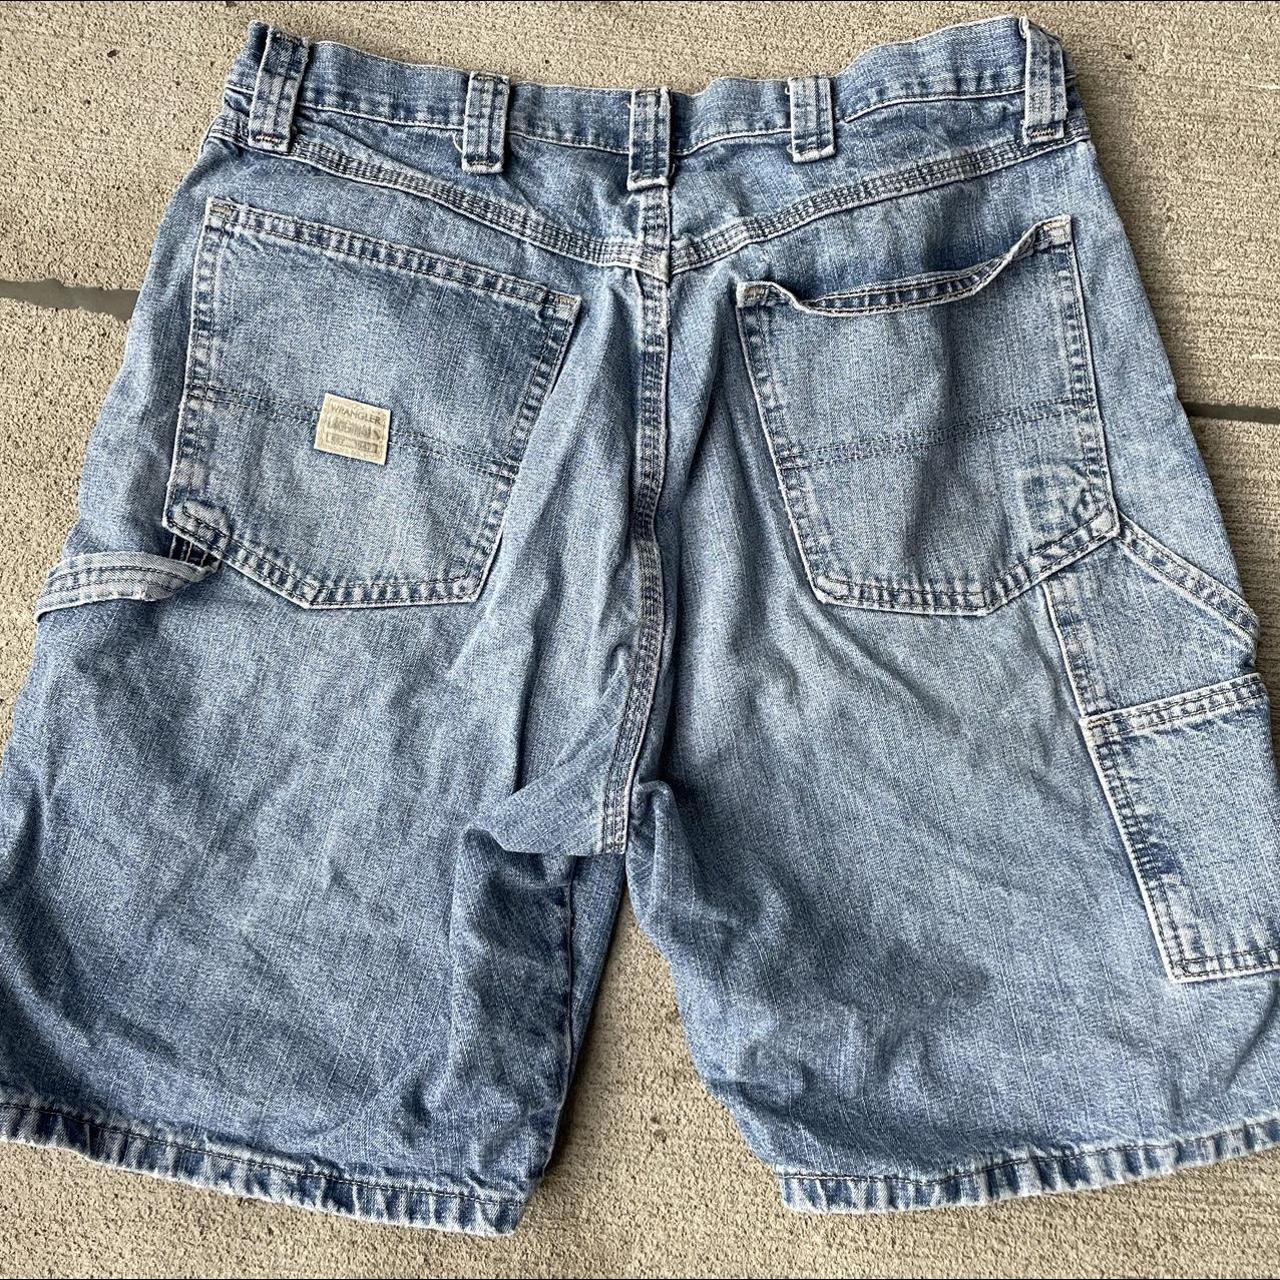 Wrangler jorts -size 34 -great condition besides a... - Depop